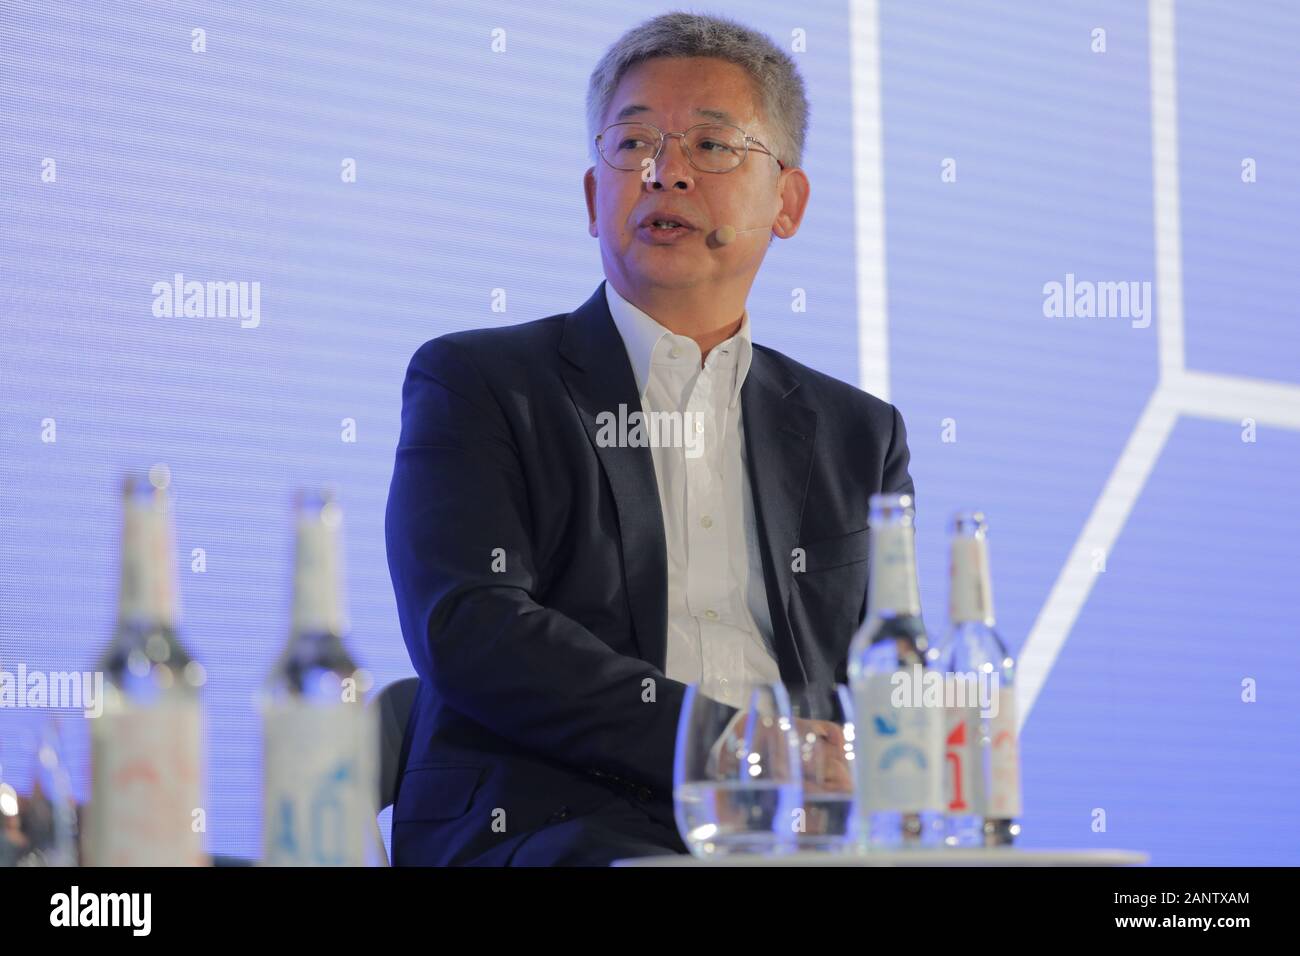 19 January 2020, Bavaria, Munich: Yiping Huang (Director of the Institute of Digital Finance (IDF), Peking University) speaks during a panel at DLD Munich Conference 2020, Europe's big innovation conference, Alte Kongresshalle, Munich, January 18-20, 2020 Picture Alliance for DLD / Hubert Burda Media | usage worldwide Stock Photo